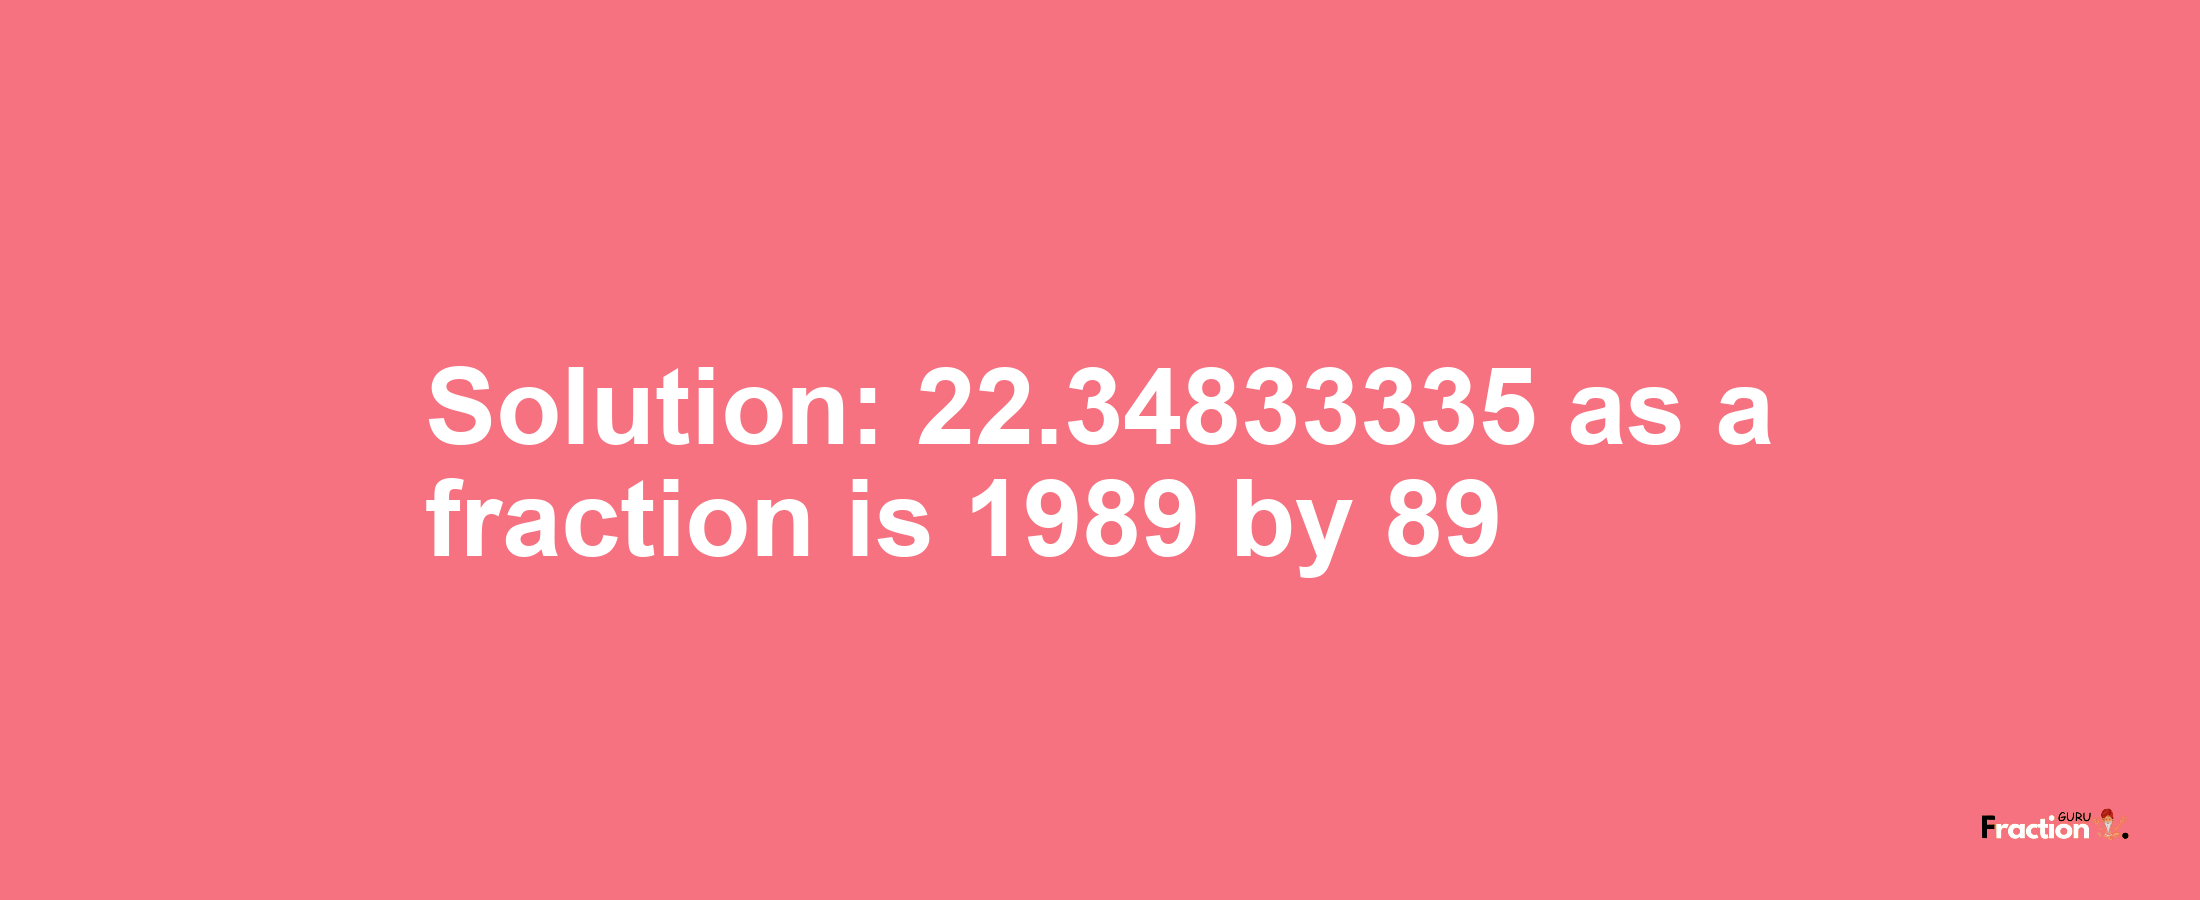 Solution:22.34833335 as a fraction is 1989/89